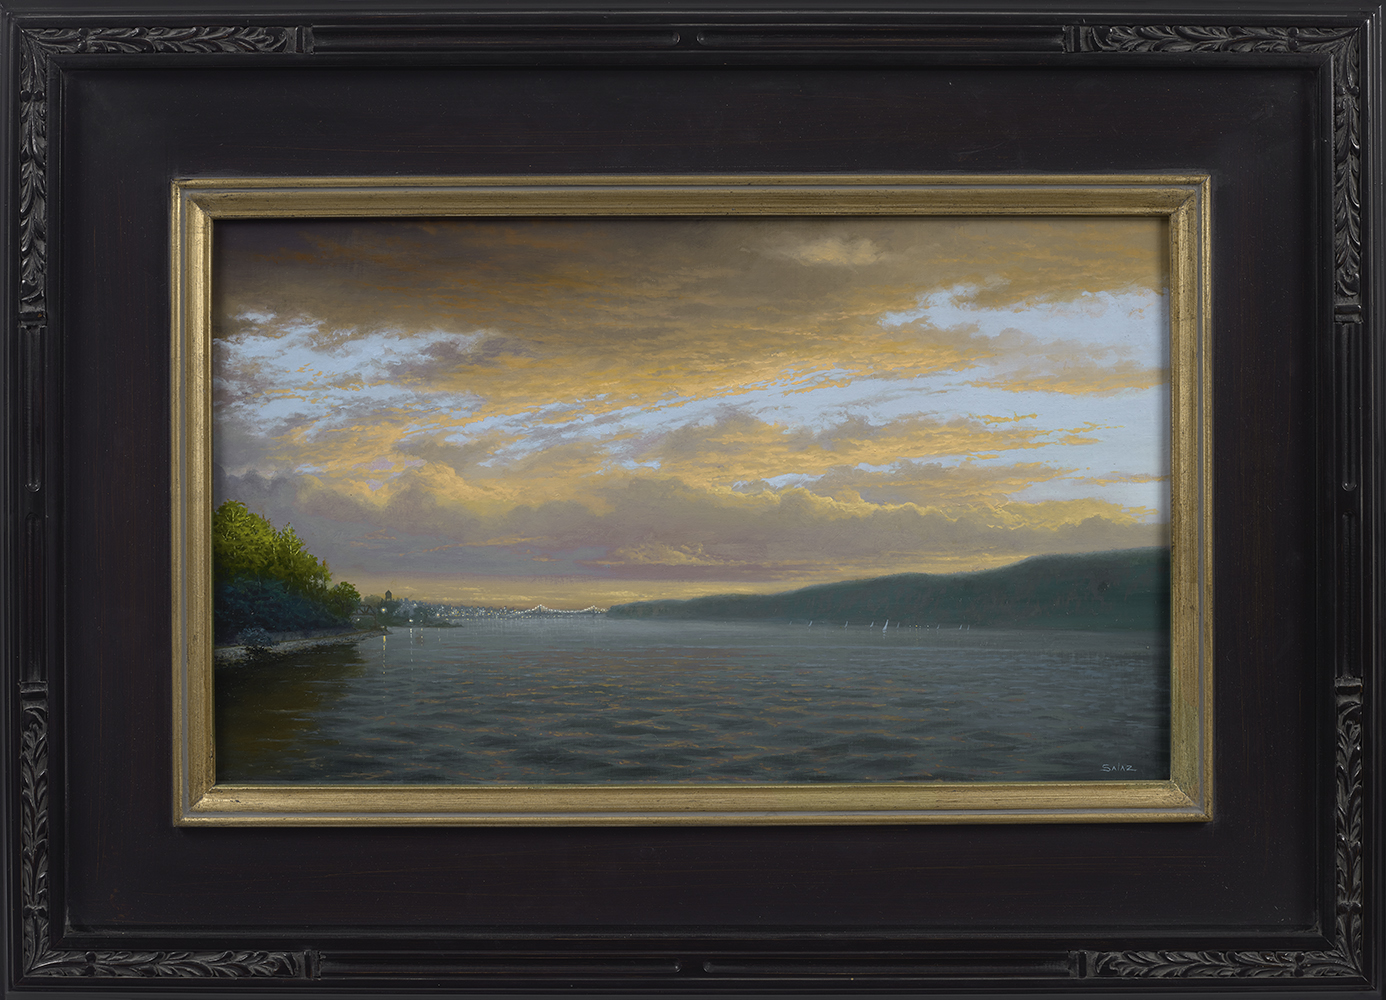 klen_salaz_kws1097_sunset_dobbs_ferry_looking_south_to_nyc_framed.jpg